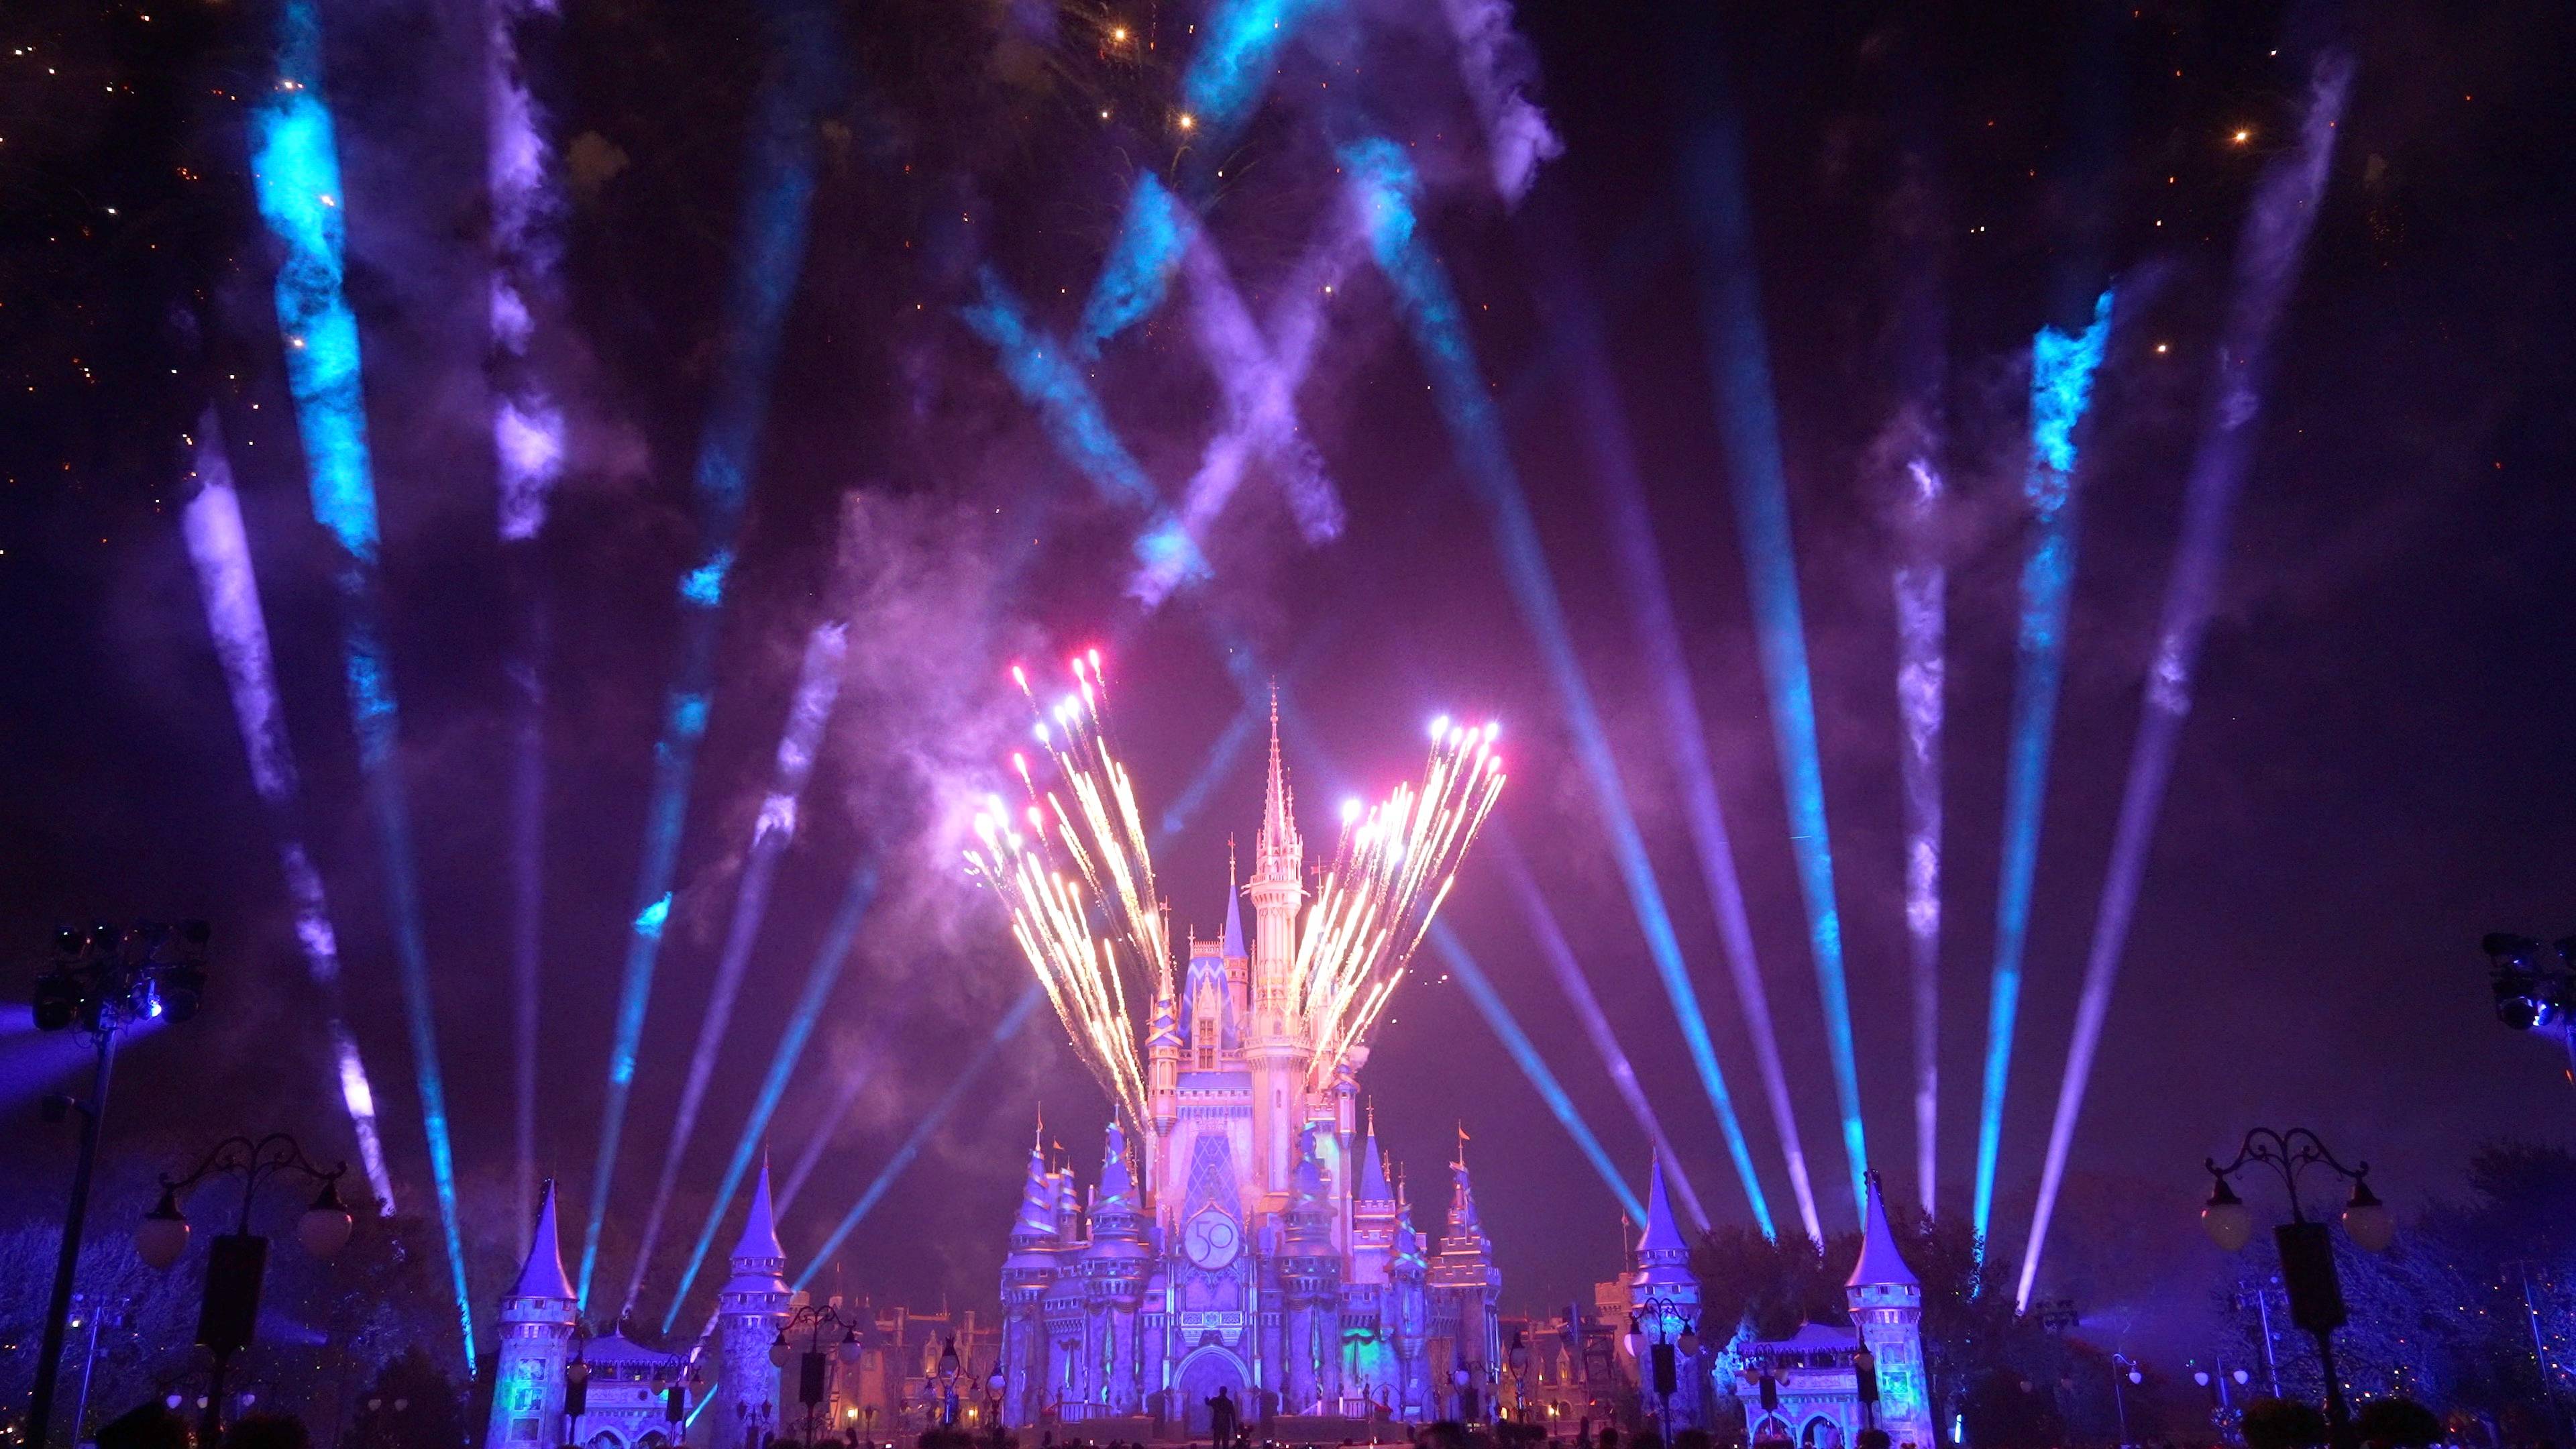 VIDEO - Minnie's Wonderful Christmastime Fireworks show debuts for 2021 at Magic Kingdom